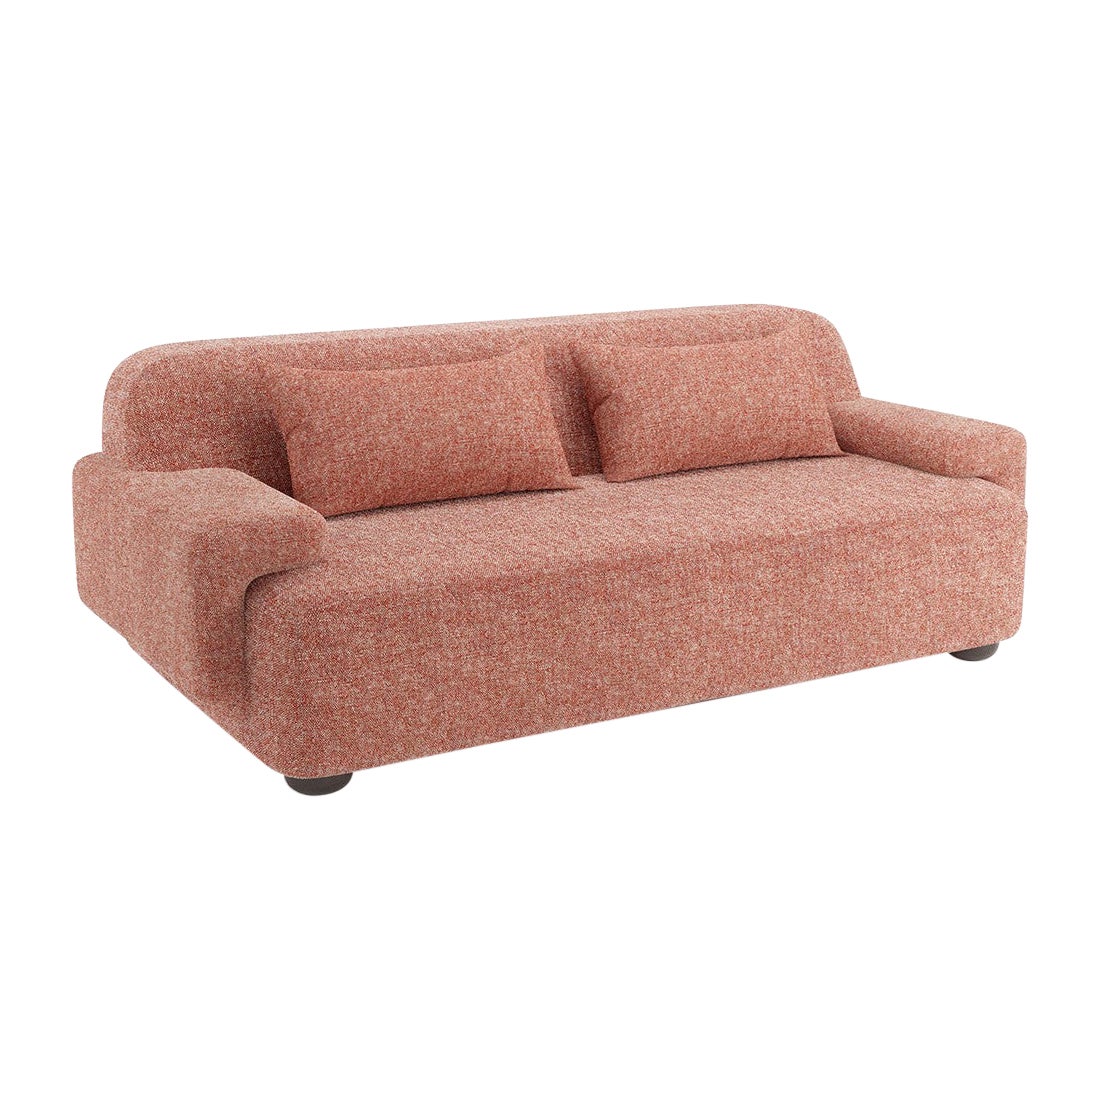 Popus Editions Lena 3 Seater Sofa in Marrakesh London Linen Fabric For Sale